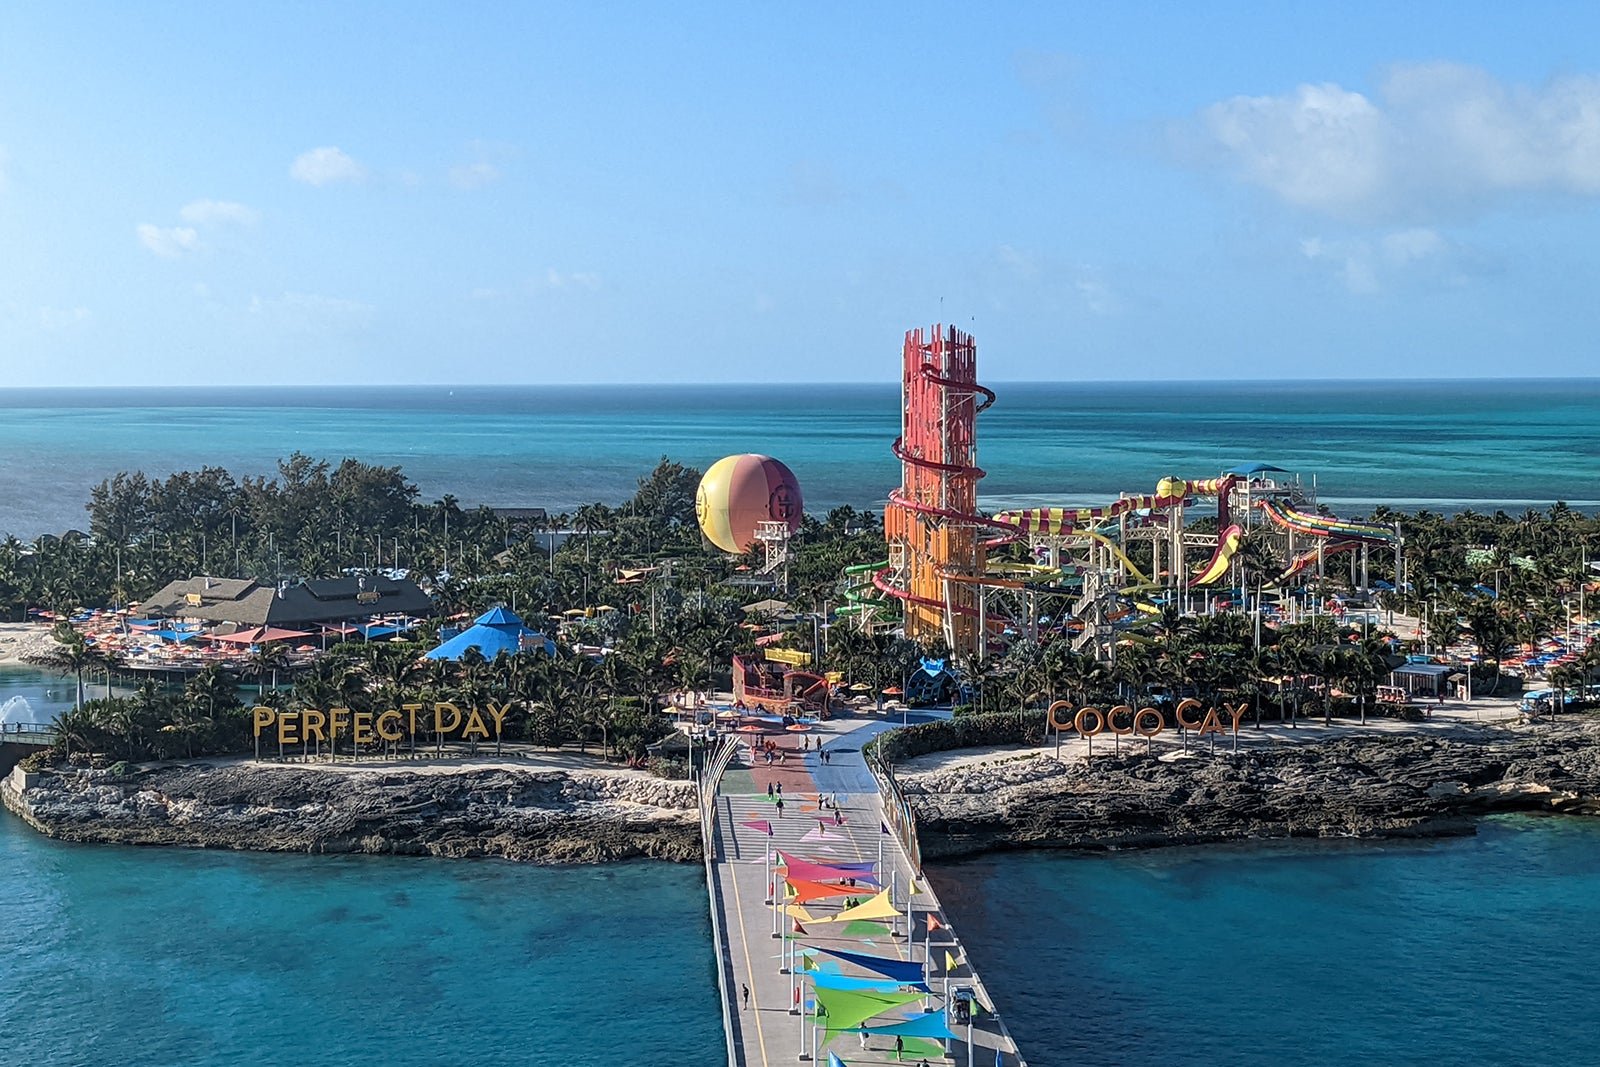 Island with tall waterslide tower and colorful balloon